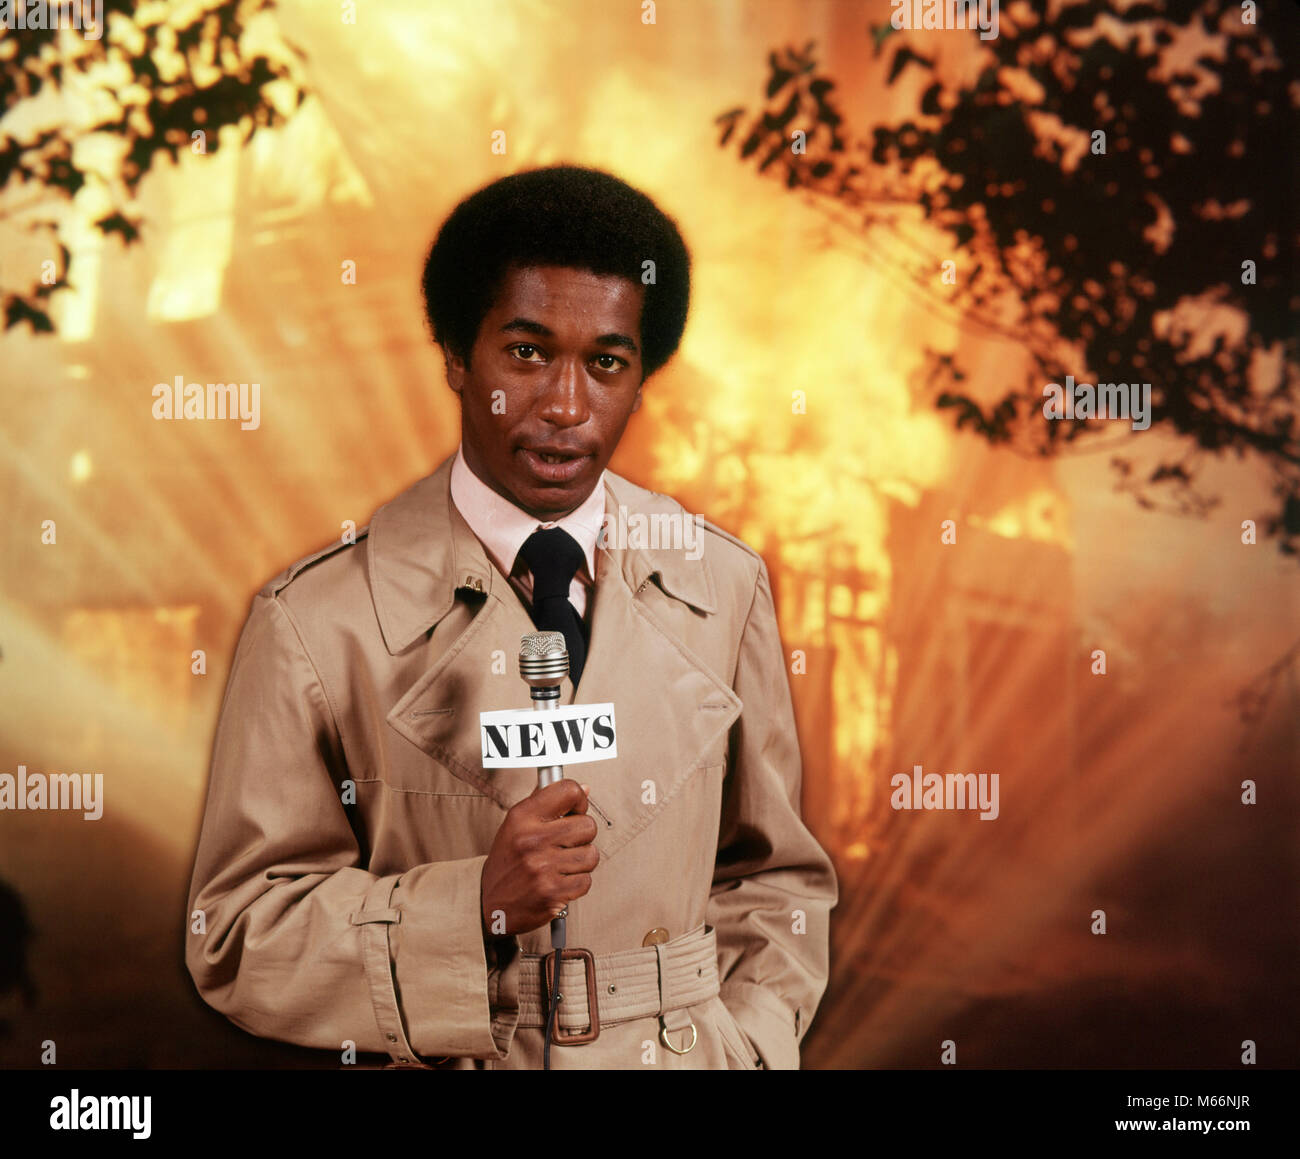 1970s AFRICAN AMERICAN MAN TV REPORTER AT SCENE OF FIRE SPEAKING TO MICROPHONE LOOKING AT CAMERA - kt2184 HAR001 HARS GROWN-UP RISK SPEAK WARM ENTERTAINMENT NOSTALGIA SADNESS EYE CONTACT 20-25 YEARS 25-30 YEARS DISASTER AFRICAN-AMERICAN COMPOSITE EXCITEMENT ETHNIC BLACK AFRO-AMERICAN AFRICAN AMERICAN ELECTRIC APPLIANCE COMMUNICATE REPORTING COMMUNICATIONS TRENCH COAT MALES MID-ADULT MID-ADULT MAN NEWSMAN LOOKING AT CAMERA OCCUPATIONS OLD FASHIONED PERSONS Stock Photo